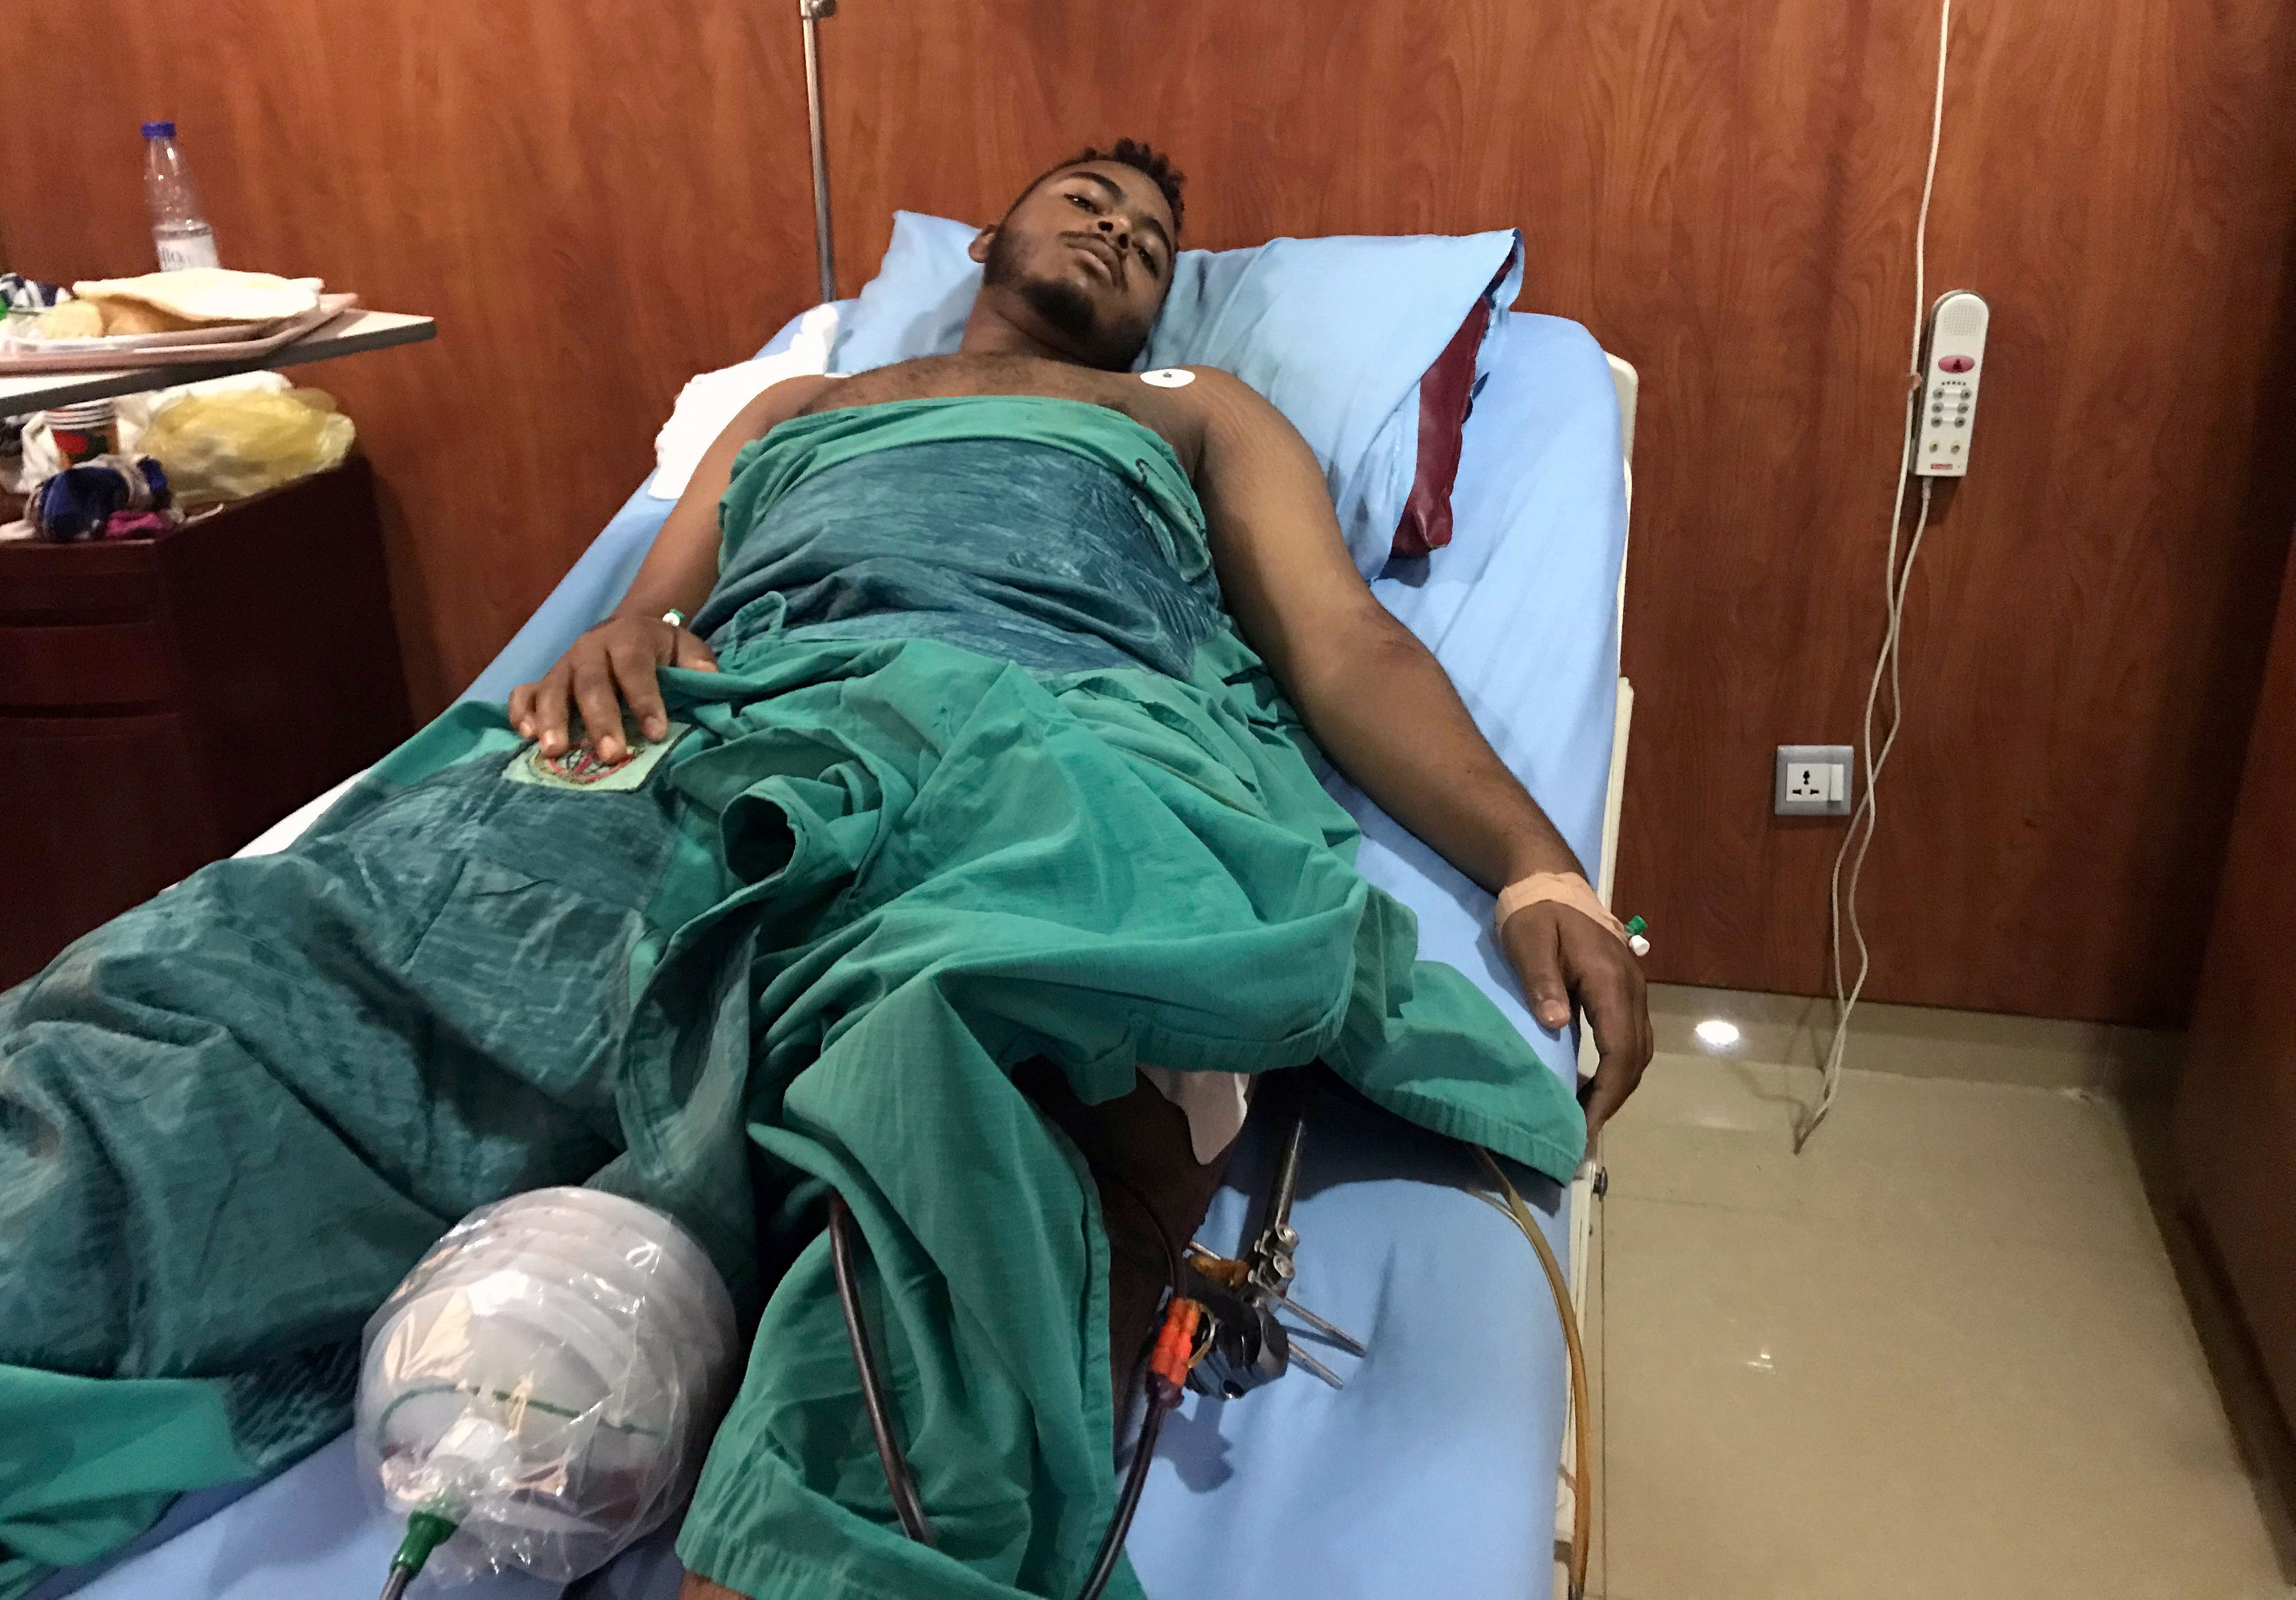 A victim of a gunshot wound sustained in the crackdown on Sudanese protesters is seen inside a ward receiving treatment in a hospital in Khartoum